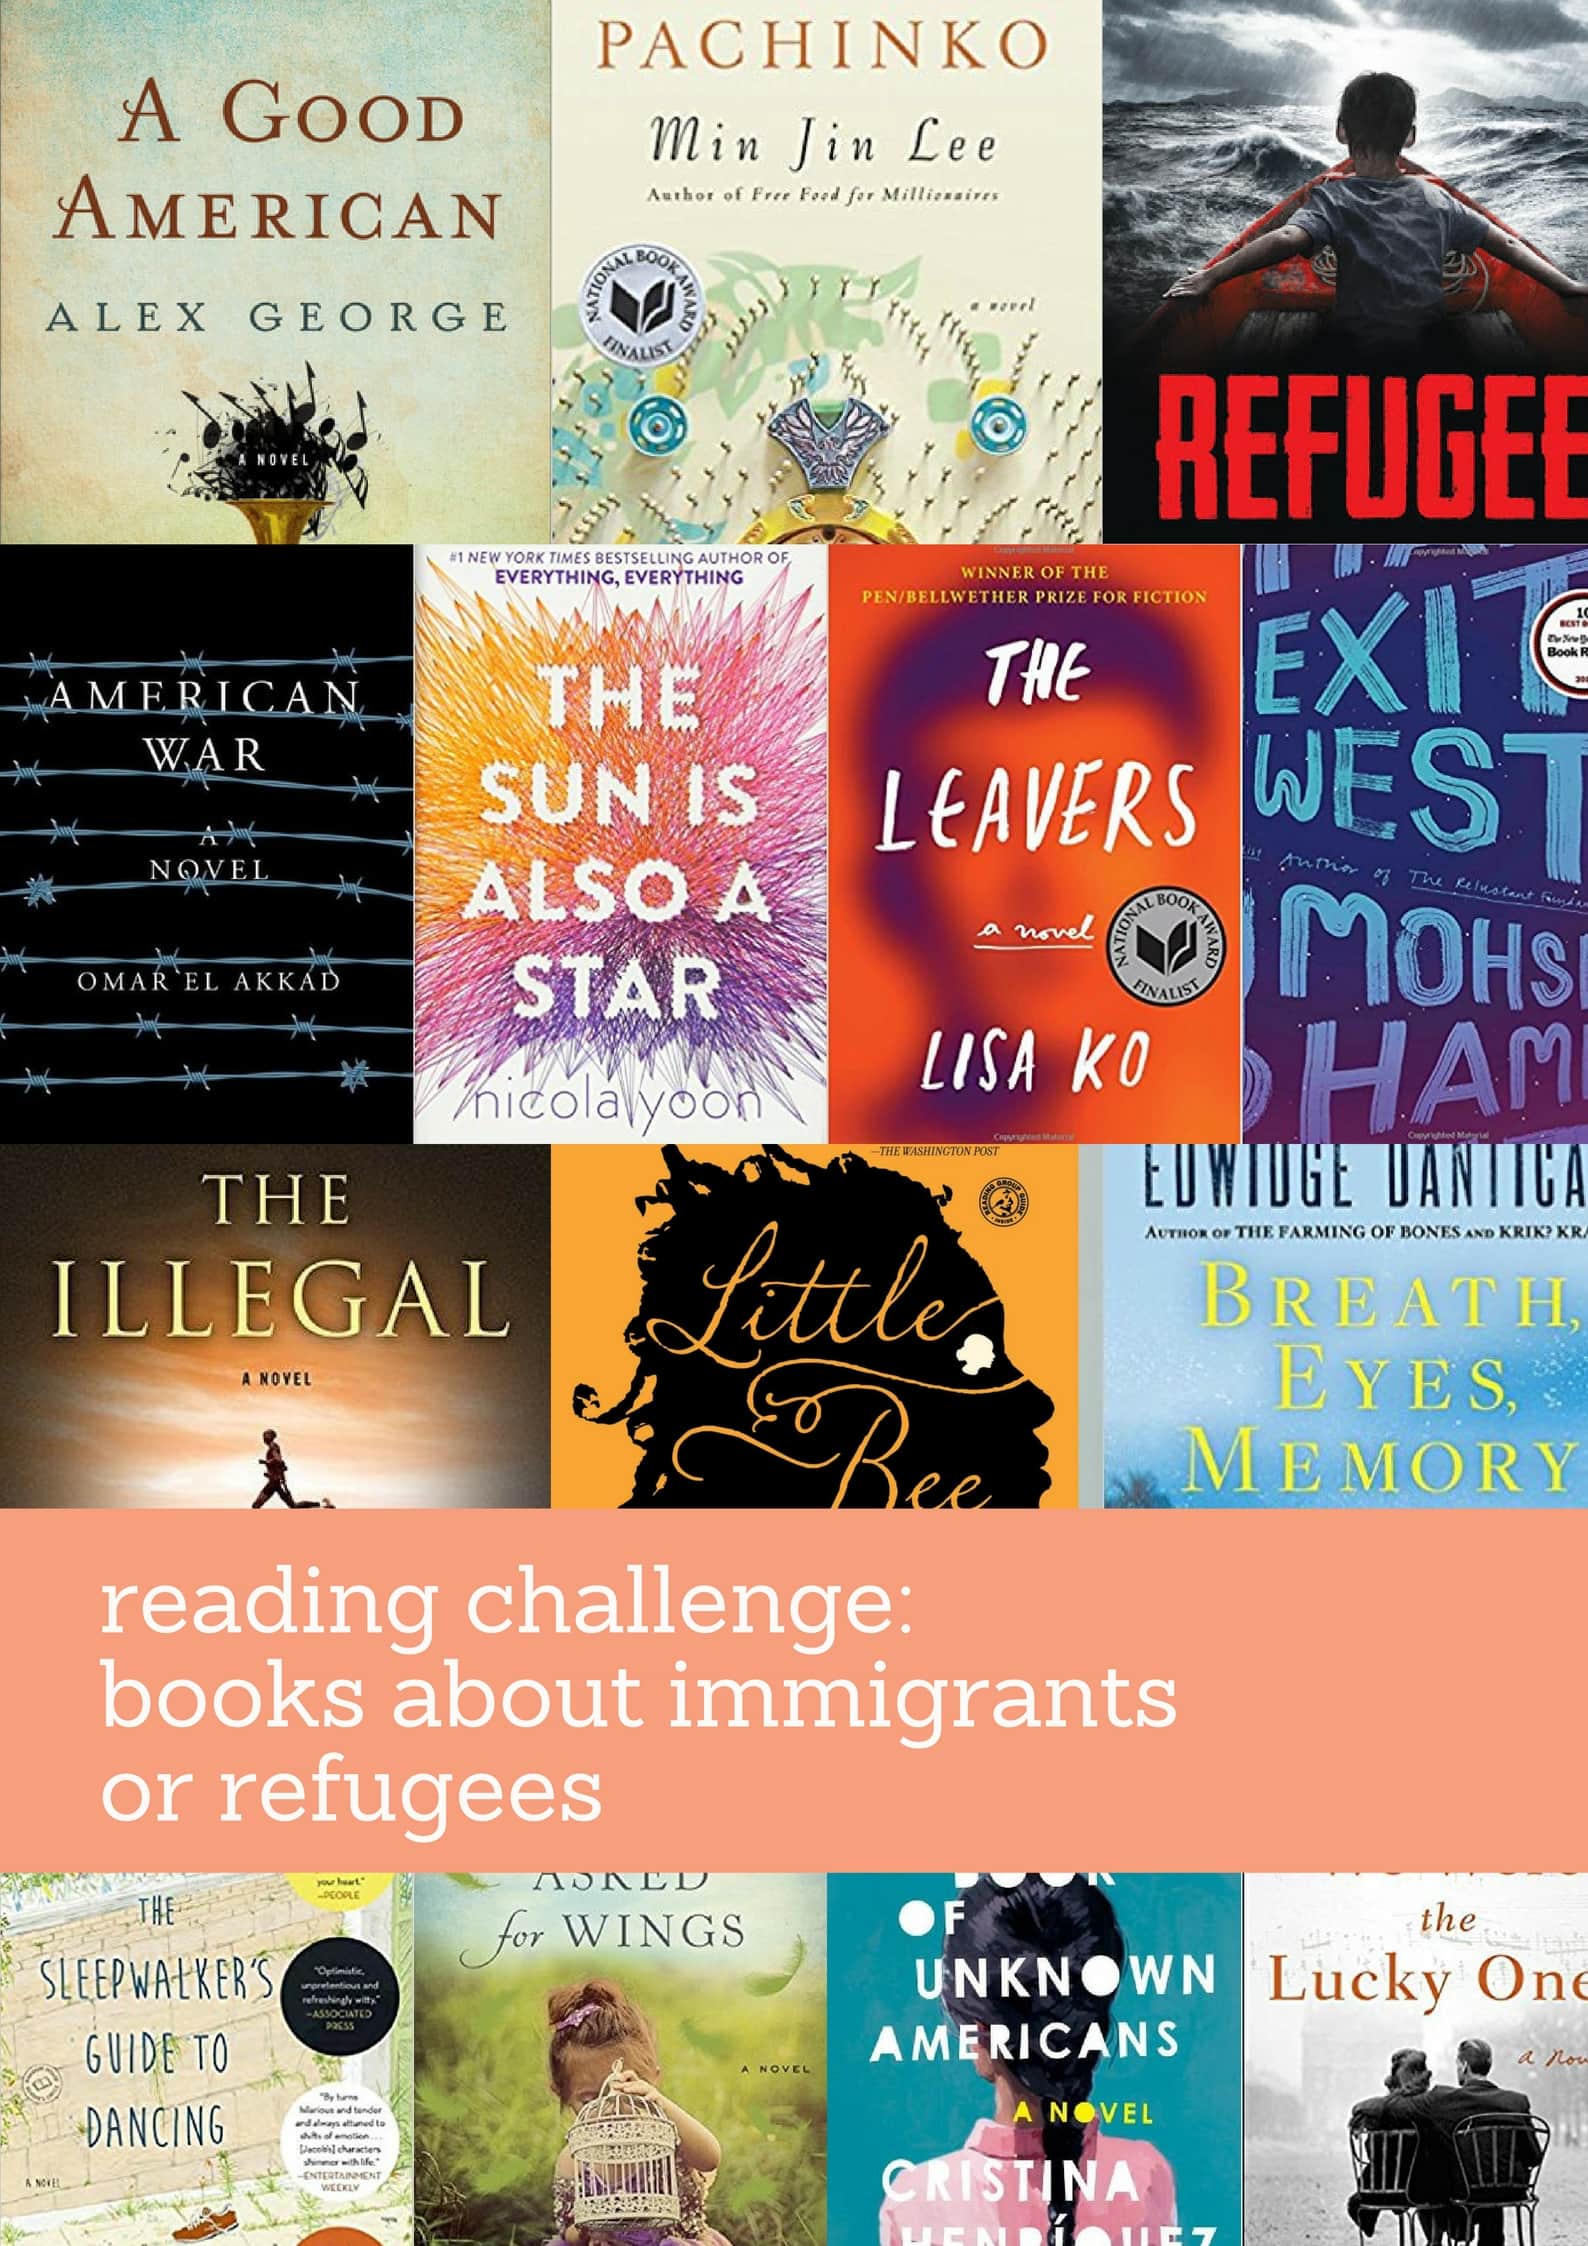 Readers Recommend: A Book About Refugees or Immigrants